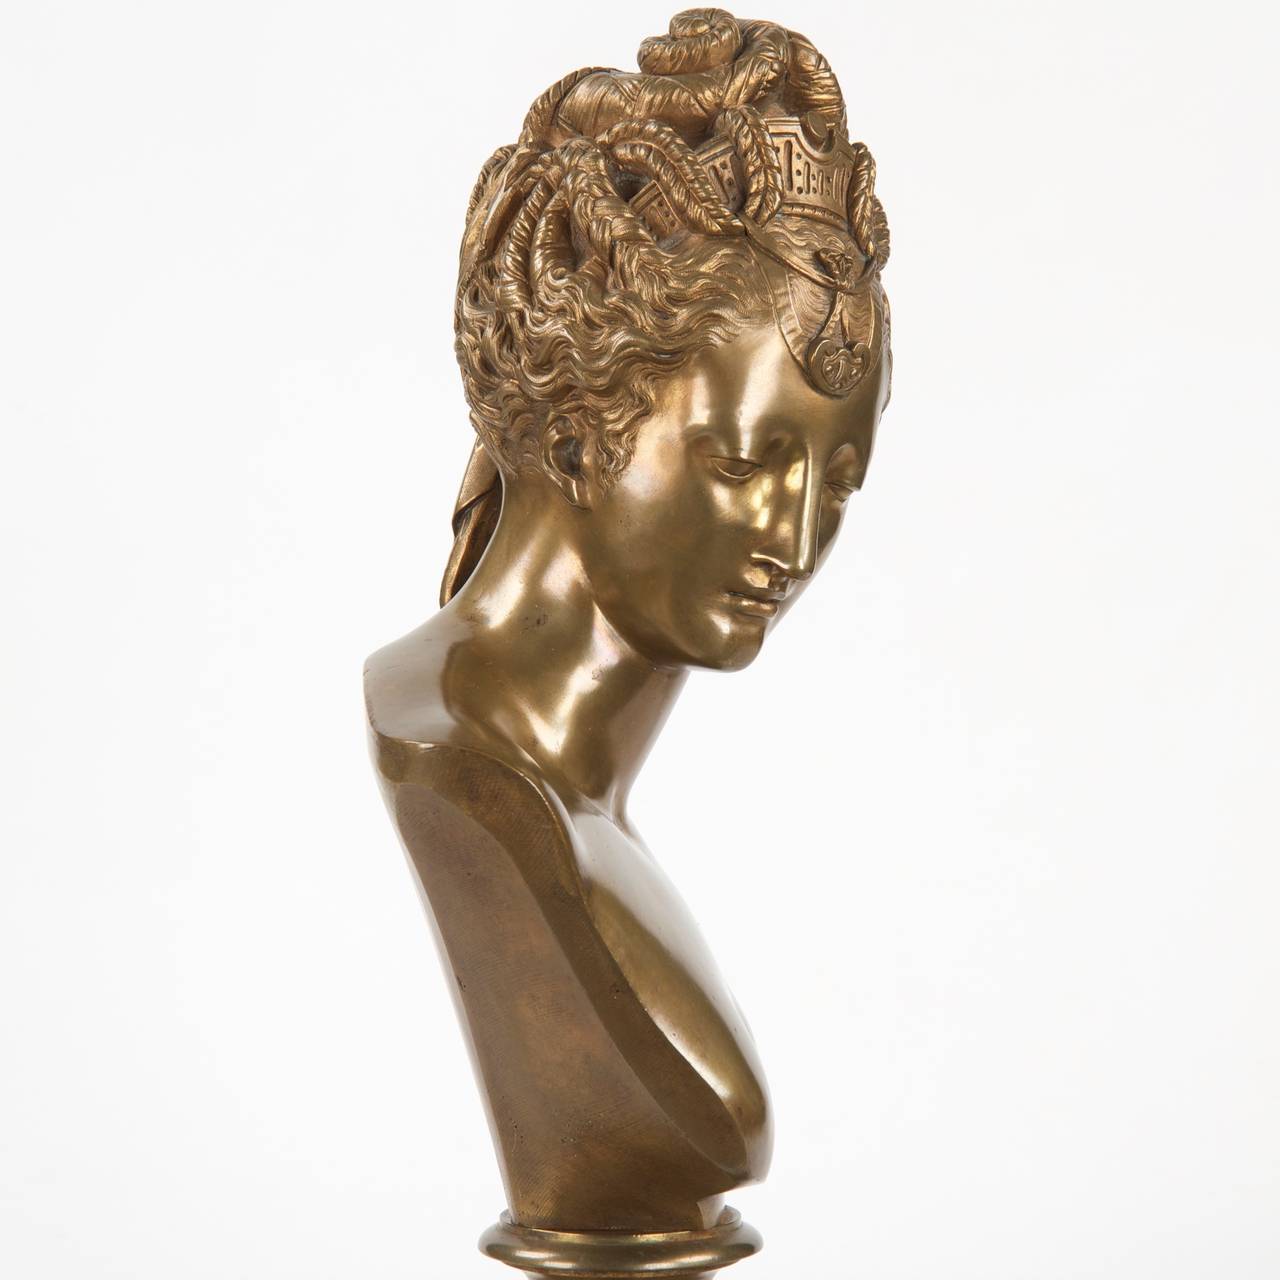 Romantic French Neoclassical Antique Bronze Bust of Diane De Poitiers, 19th Century